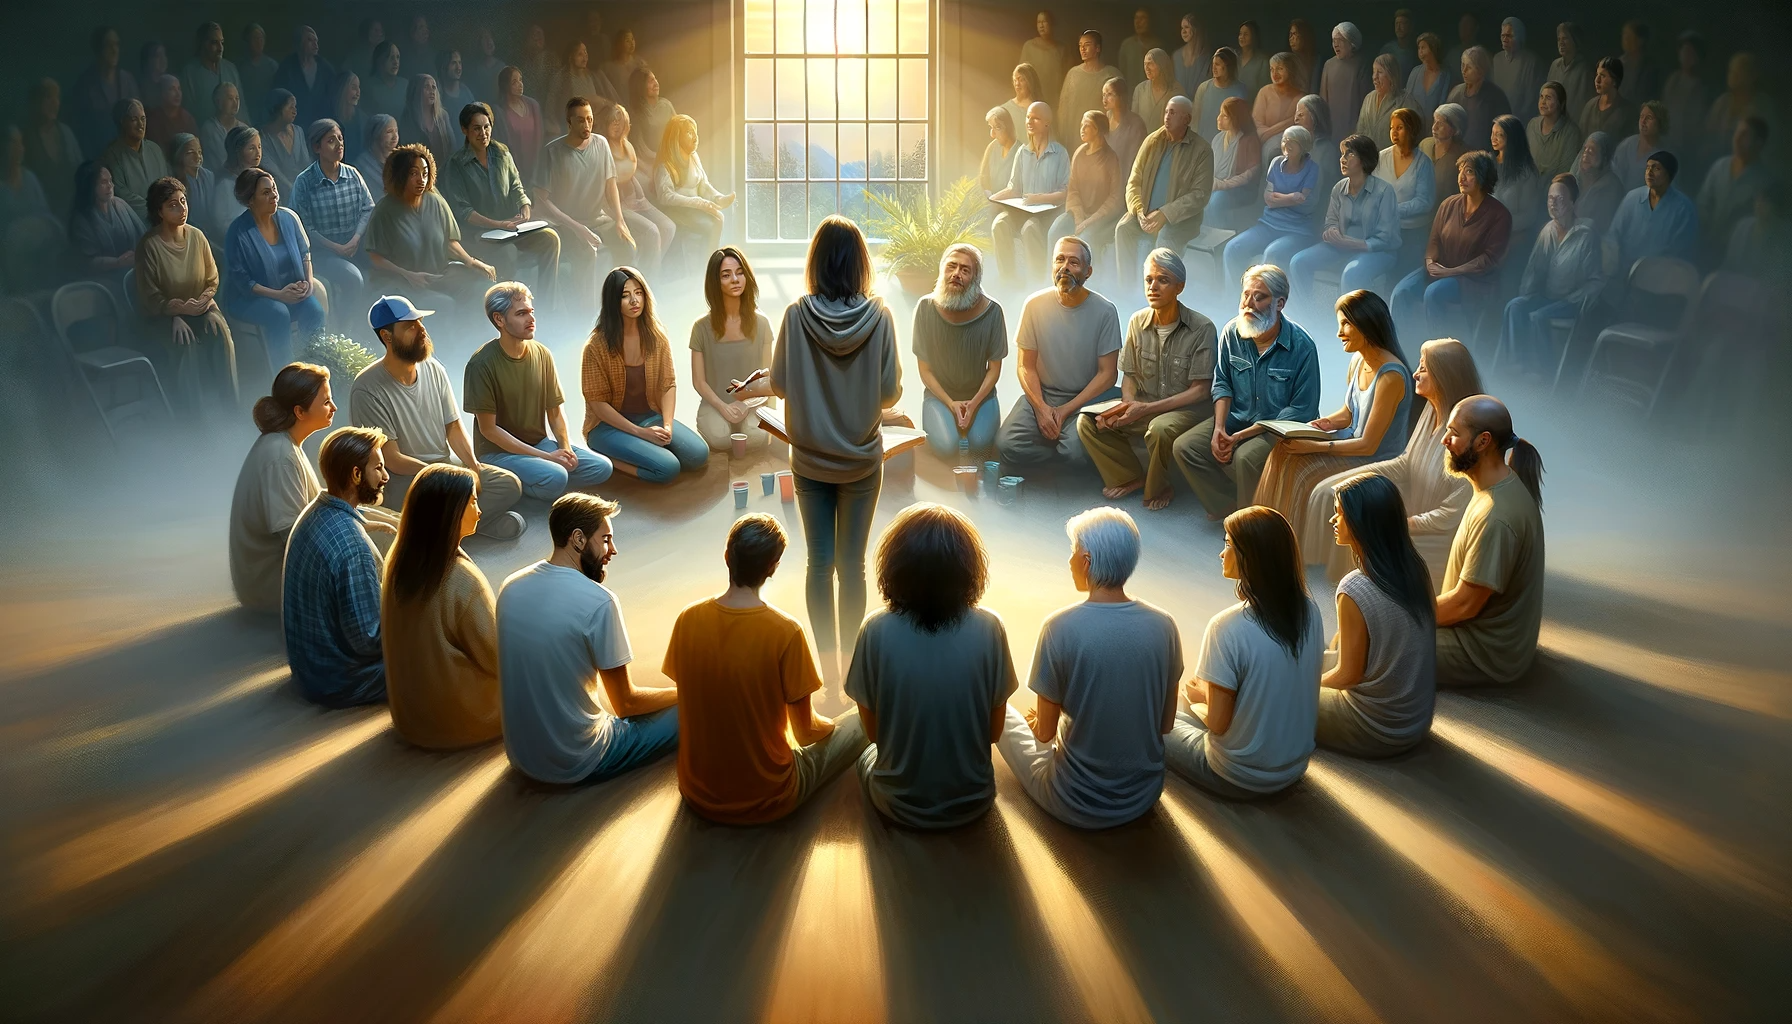 An image that beautifully illustrates the concept of fellowship and mutual support in recovery. The scene should depict a group of diverse individuals